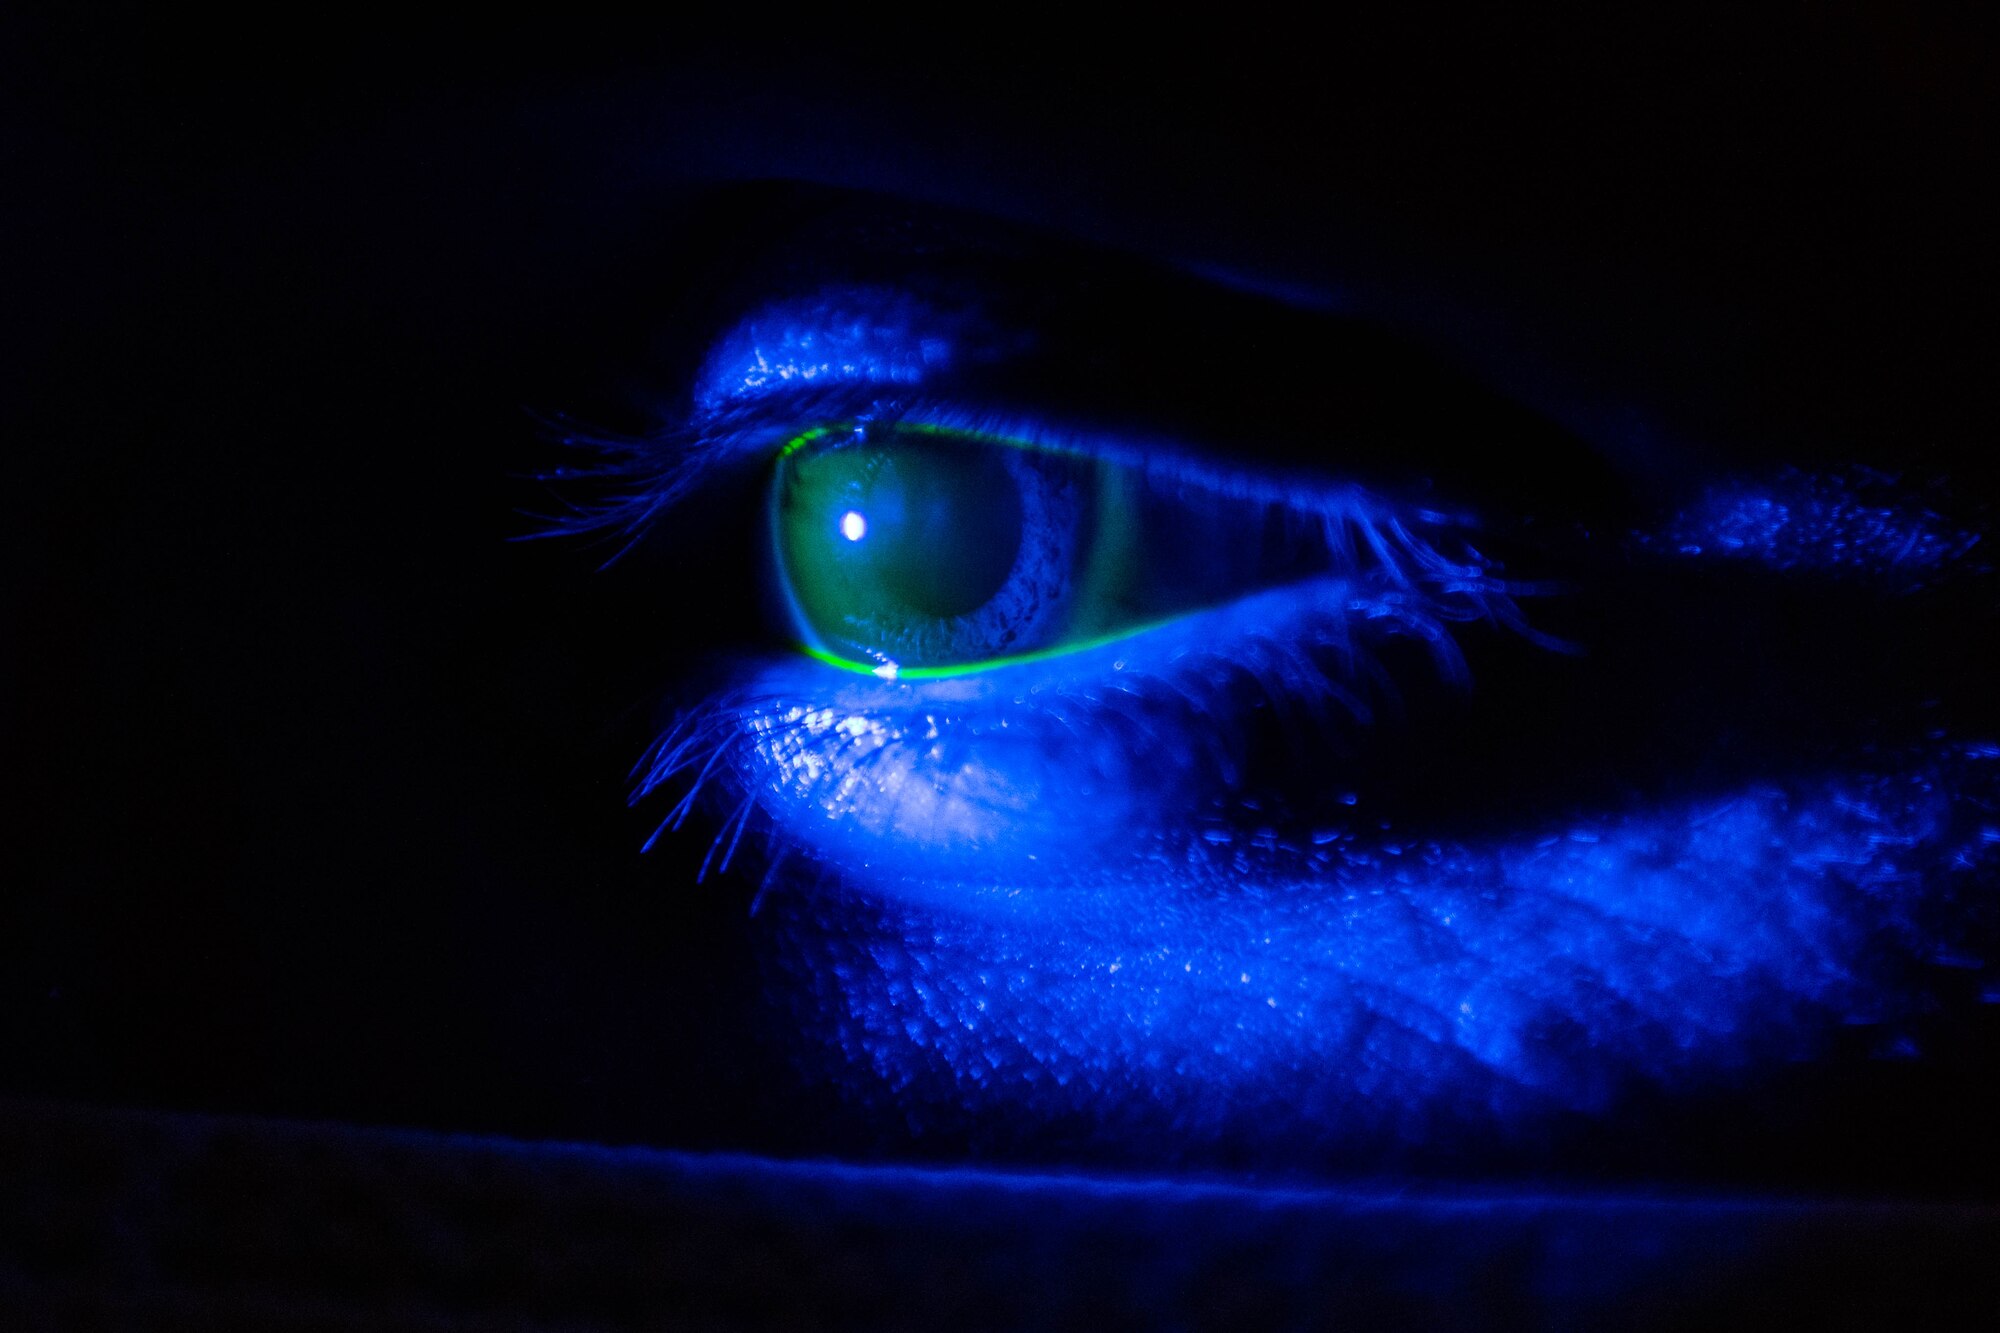 U.S. Air Force Staff Sgt. Dalton Aric, 31st Civil Engineer Squadron firefighter, receives a fluorescein evaluation at Aviano Air Base, Italy, Dec. 2, 2021. Fluorescein is used to assist in the detection of debris and corneal abrasions and the blue light helps identify and highlight the tears. (U.S. Air Force photo by Senior Airman Brooke Moeder)